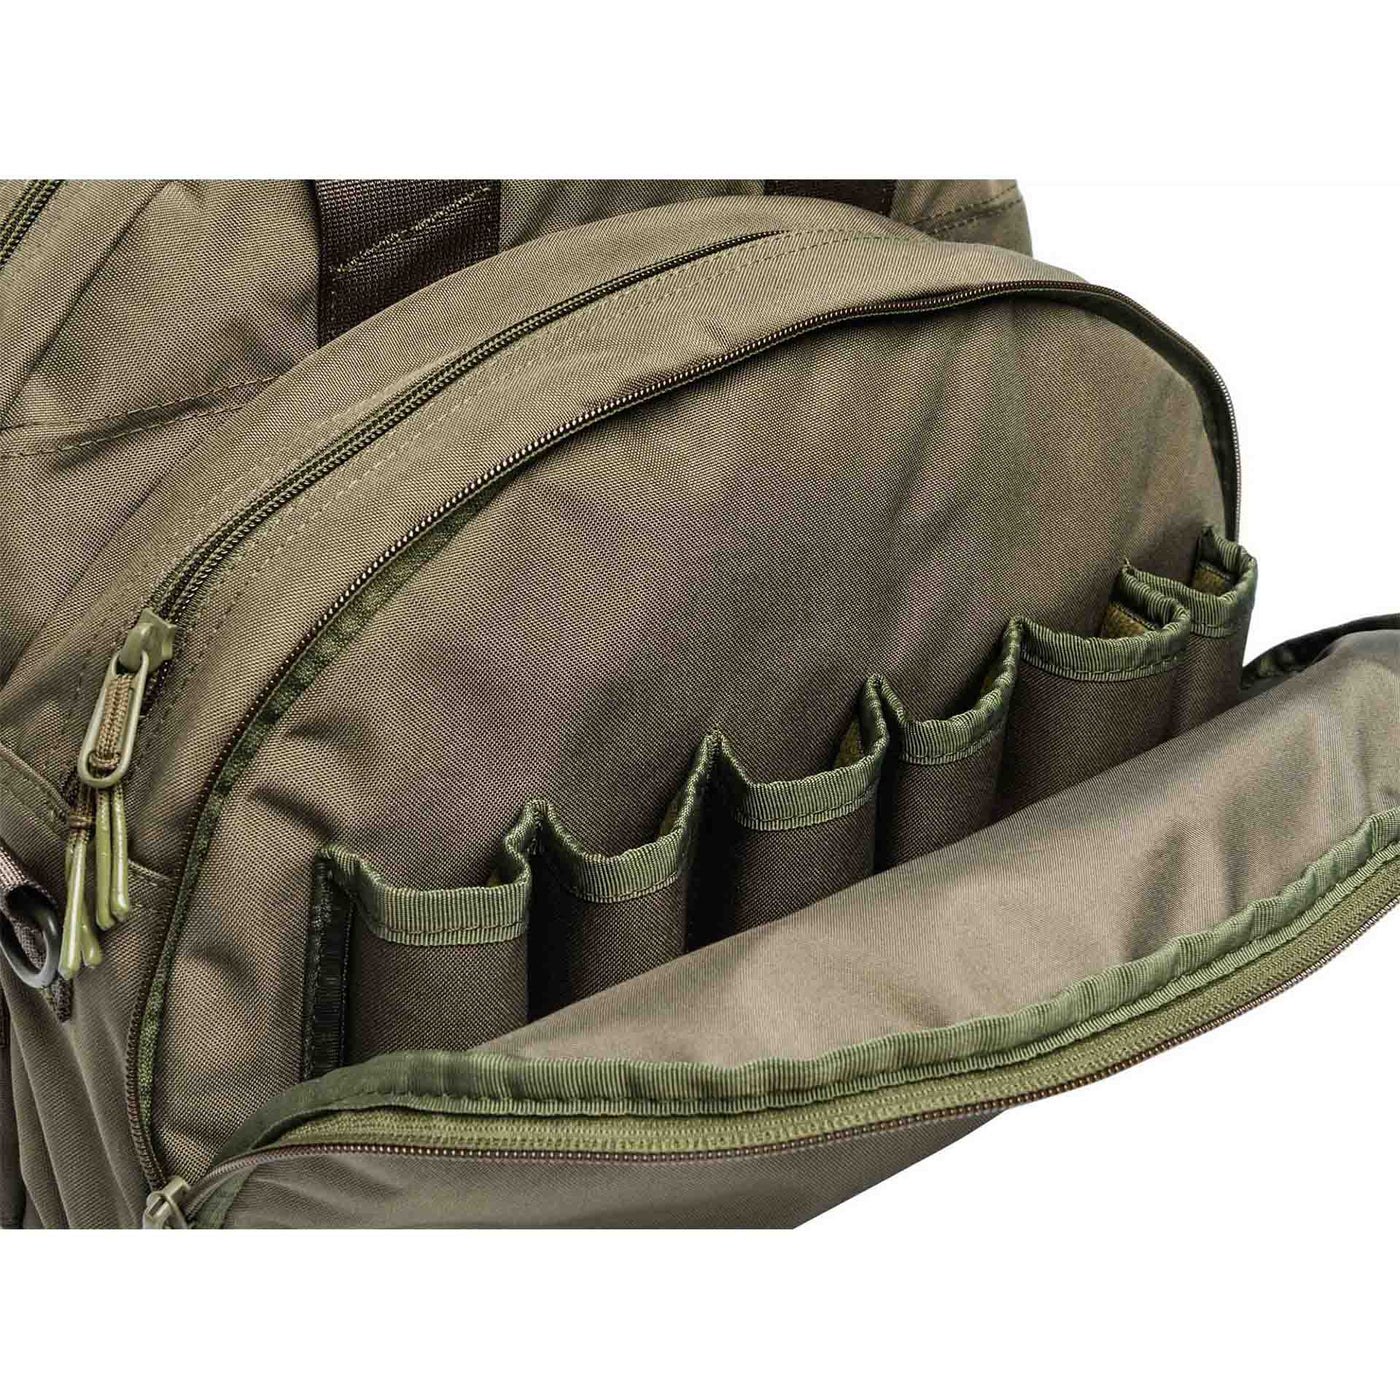 Tactical Range Bag inner compartment close up